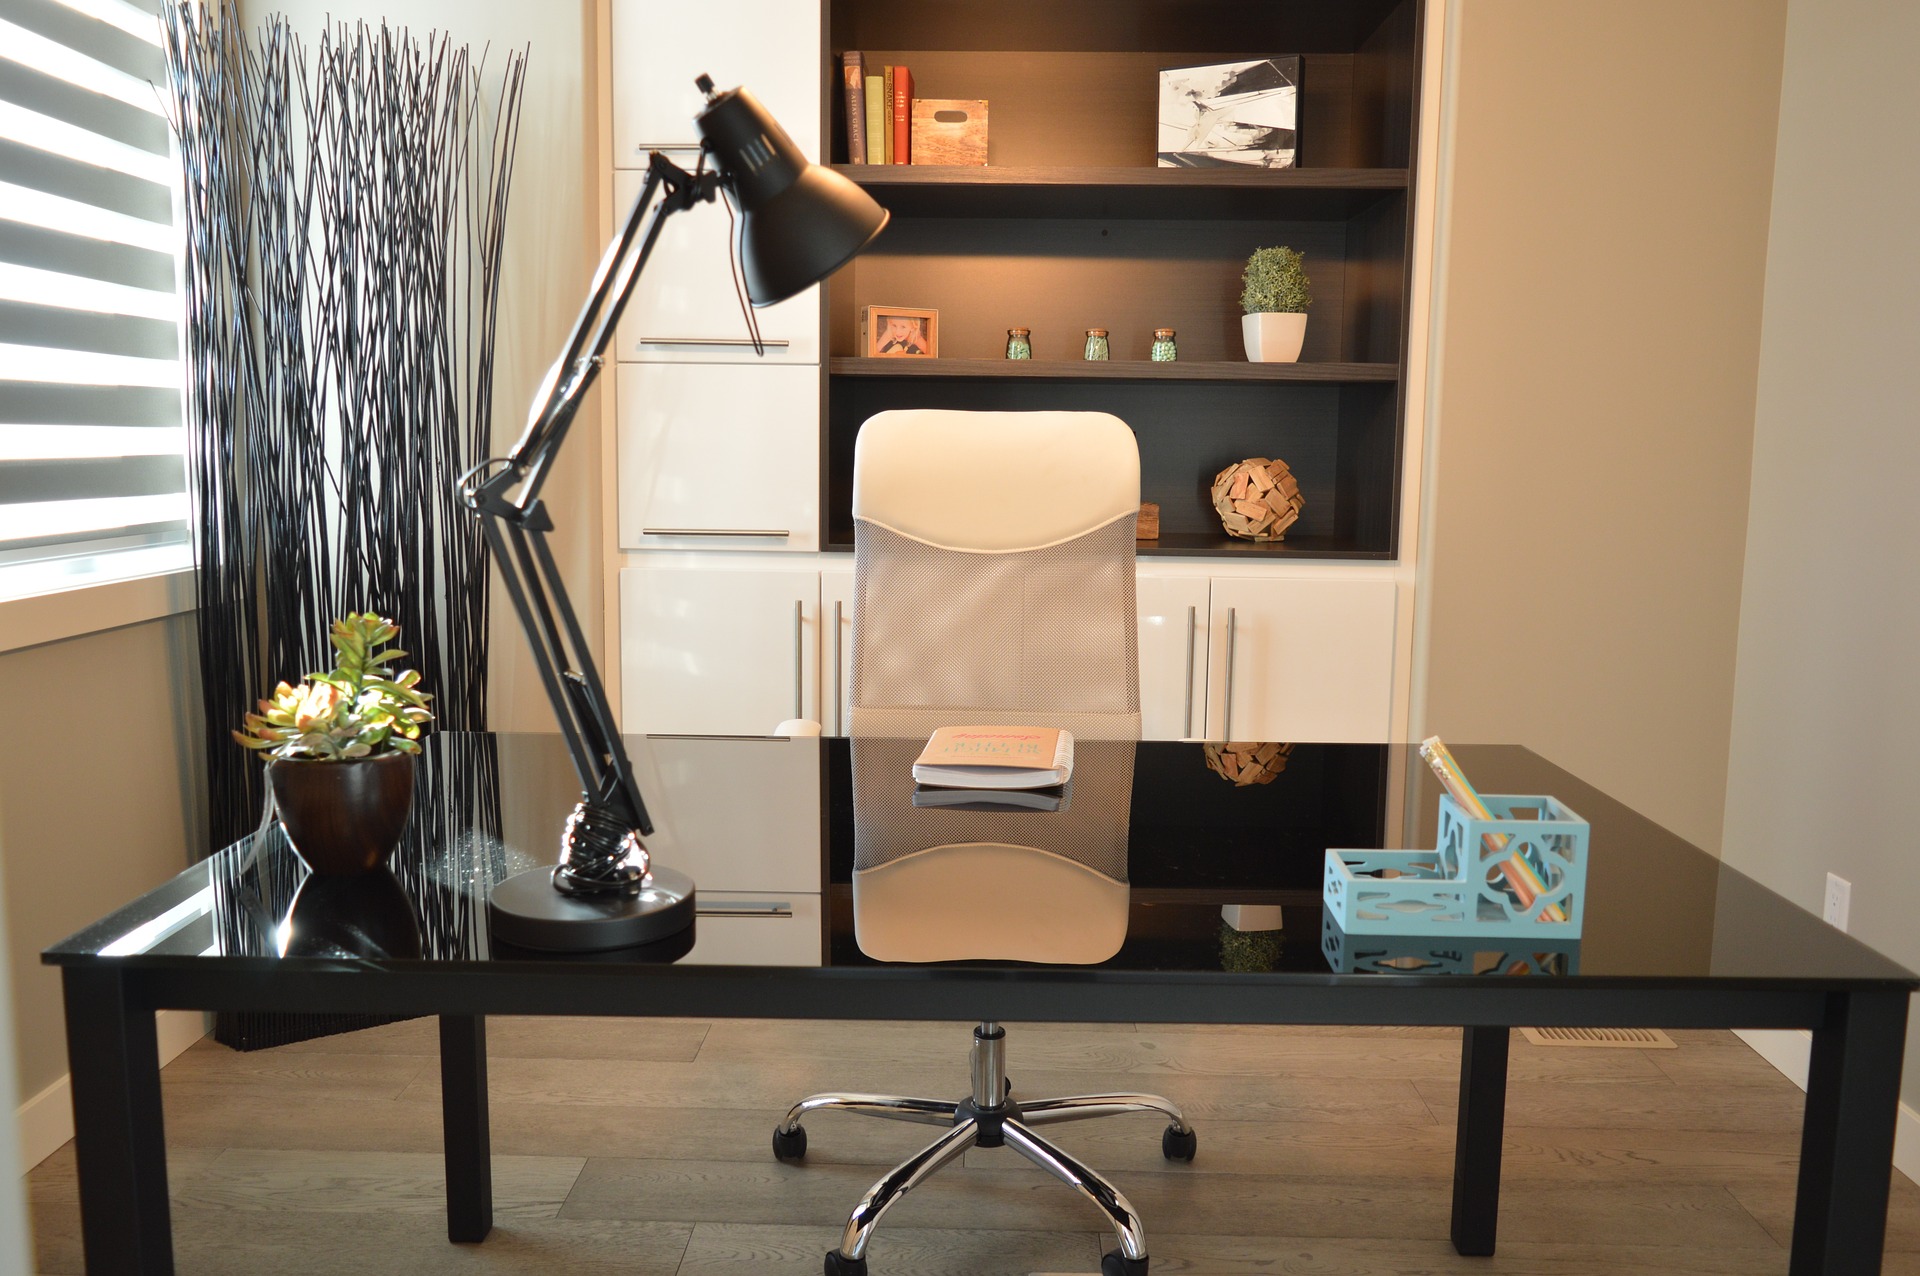 Tips on Improving Your Home Office Space